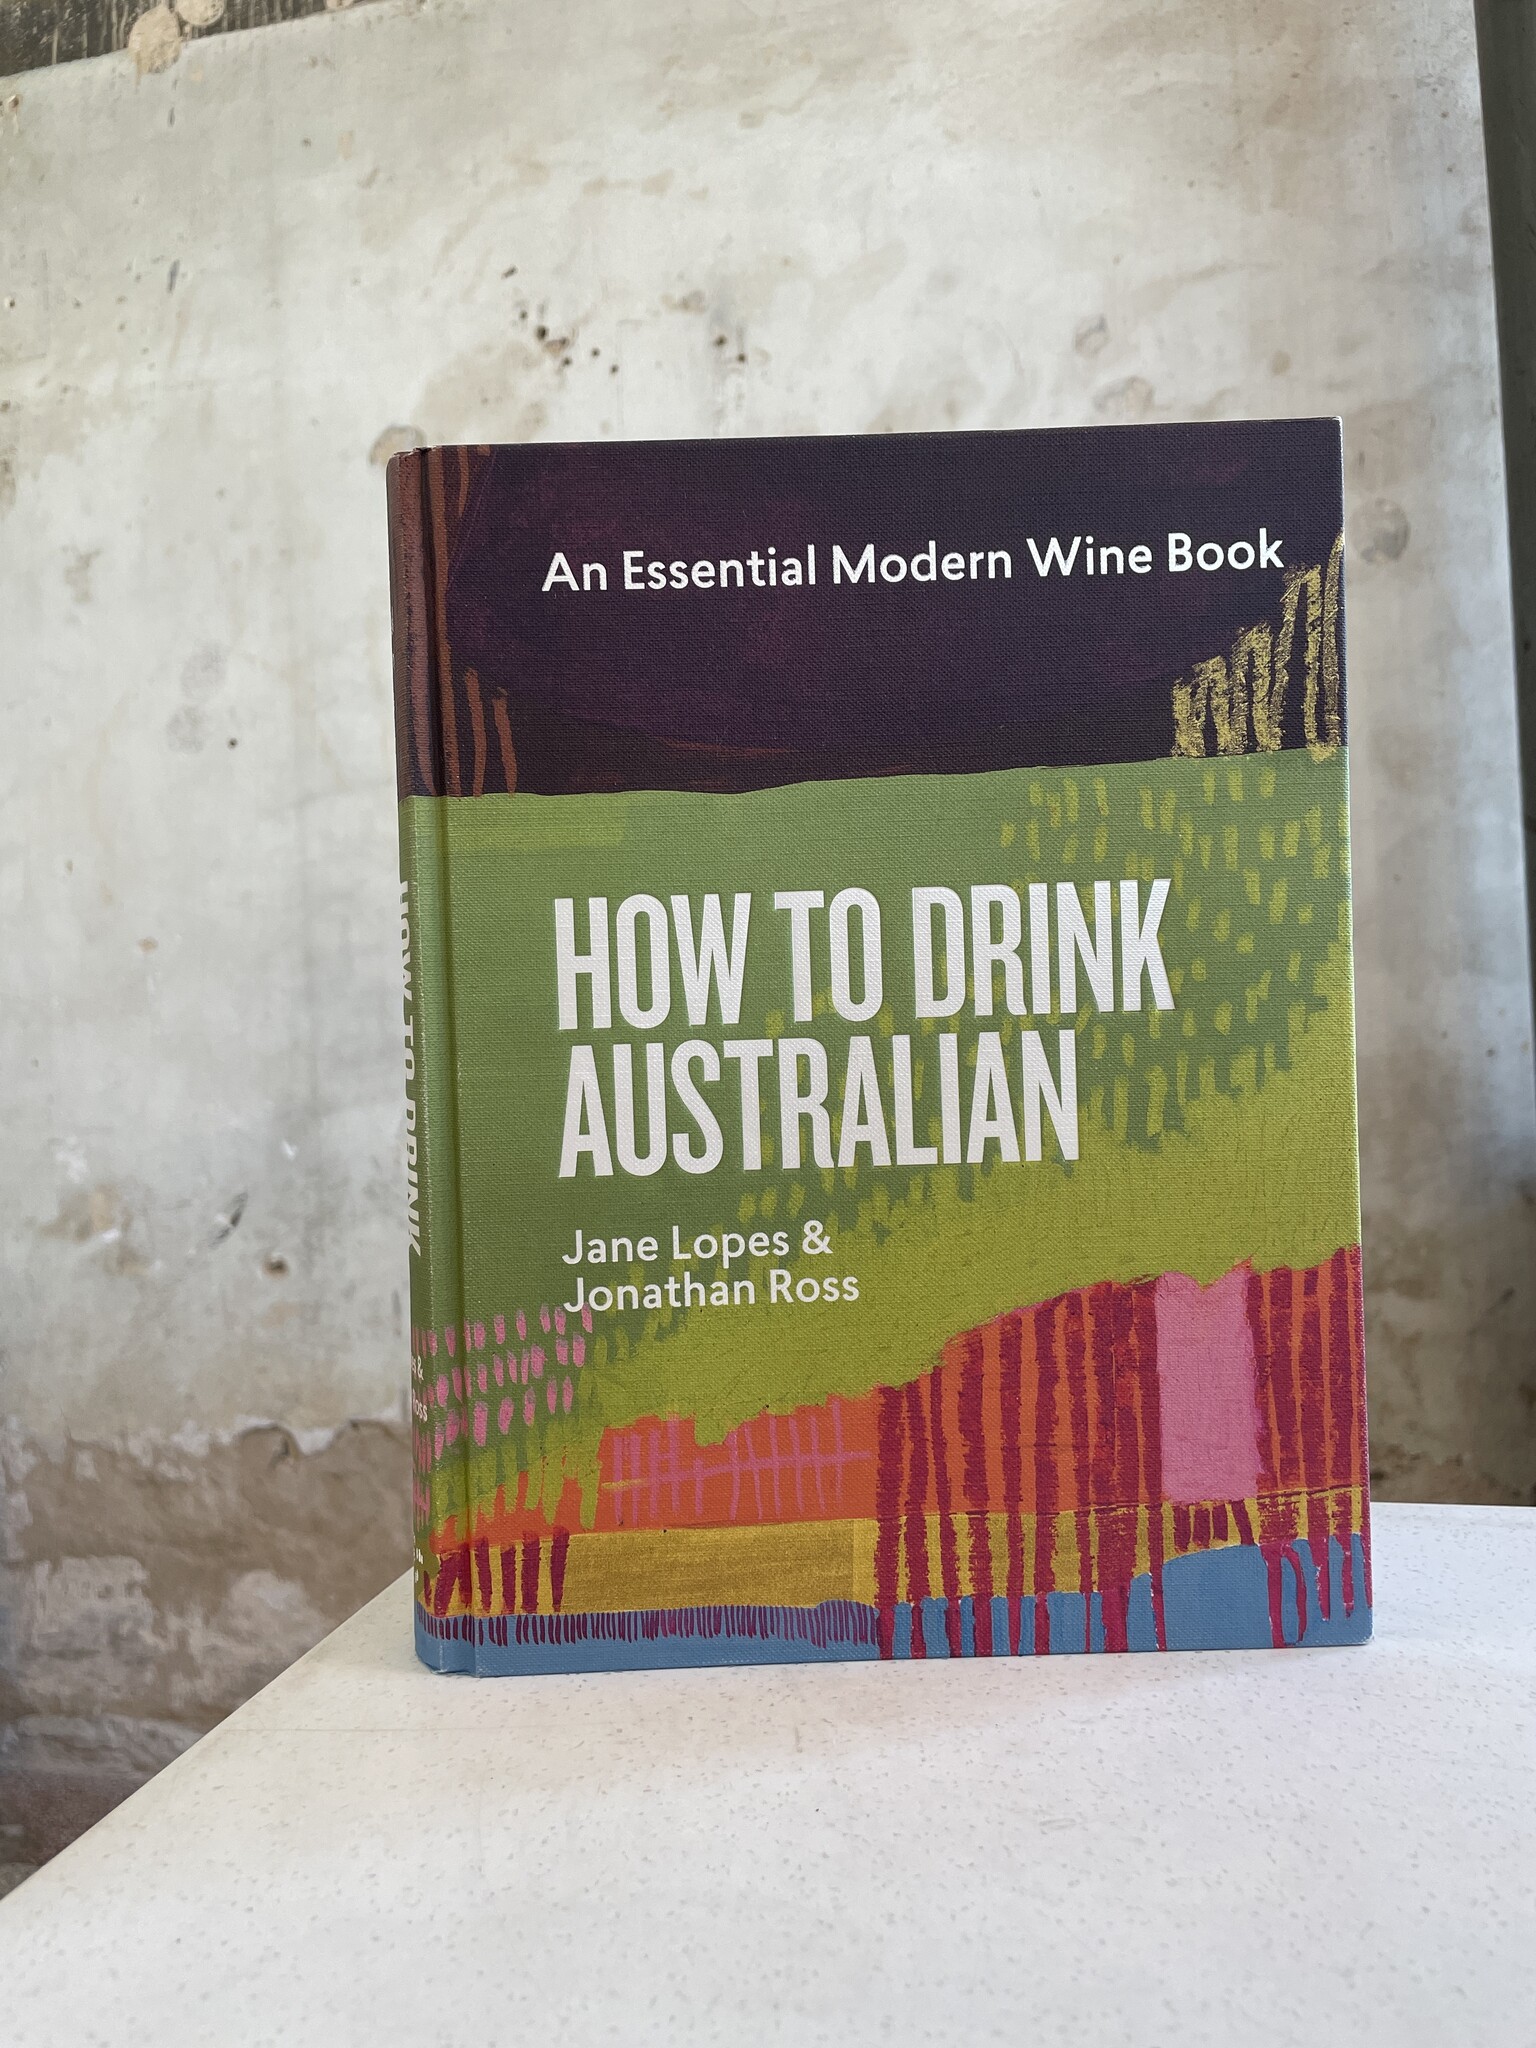 'How to Drink Australian' by Jane Lopes and Jonathan Ross